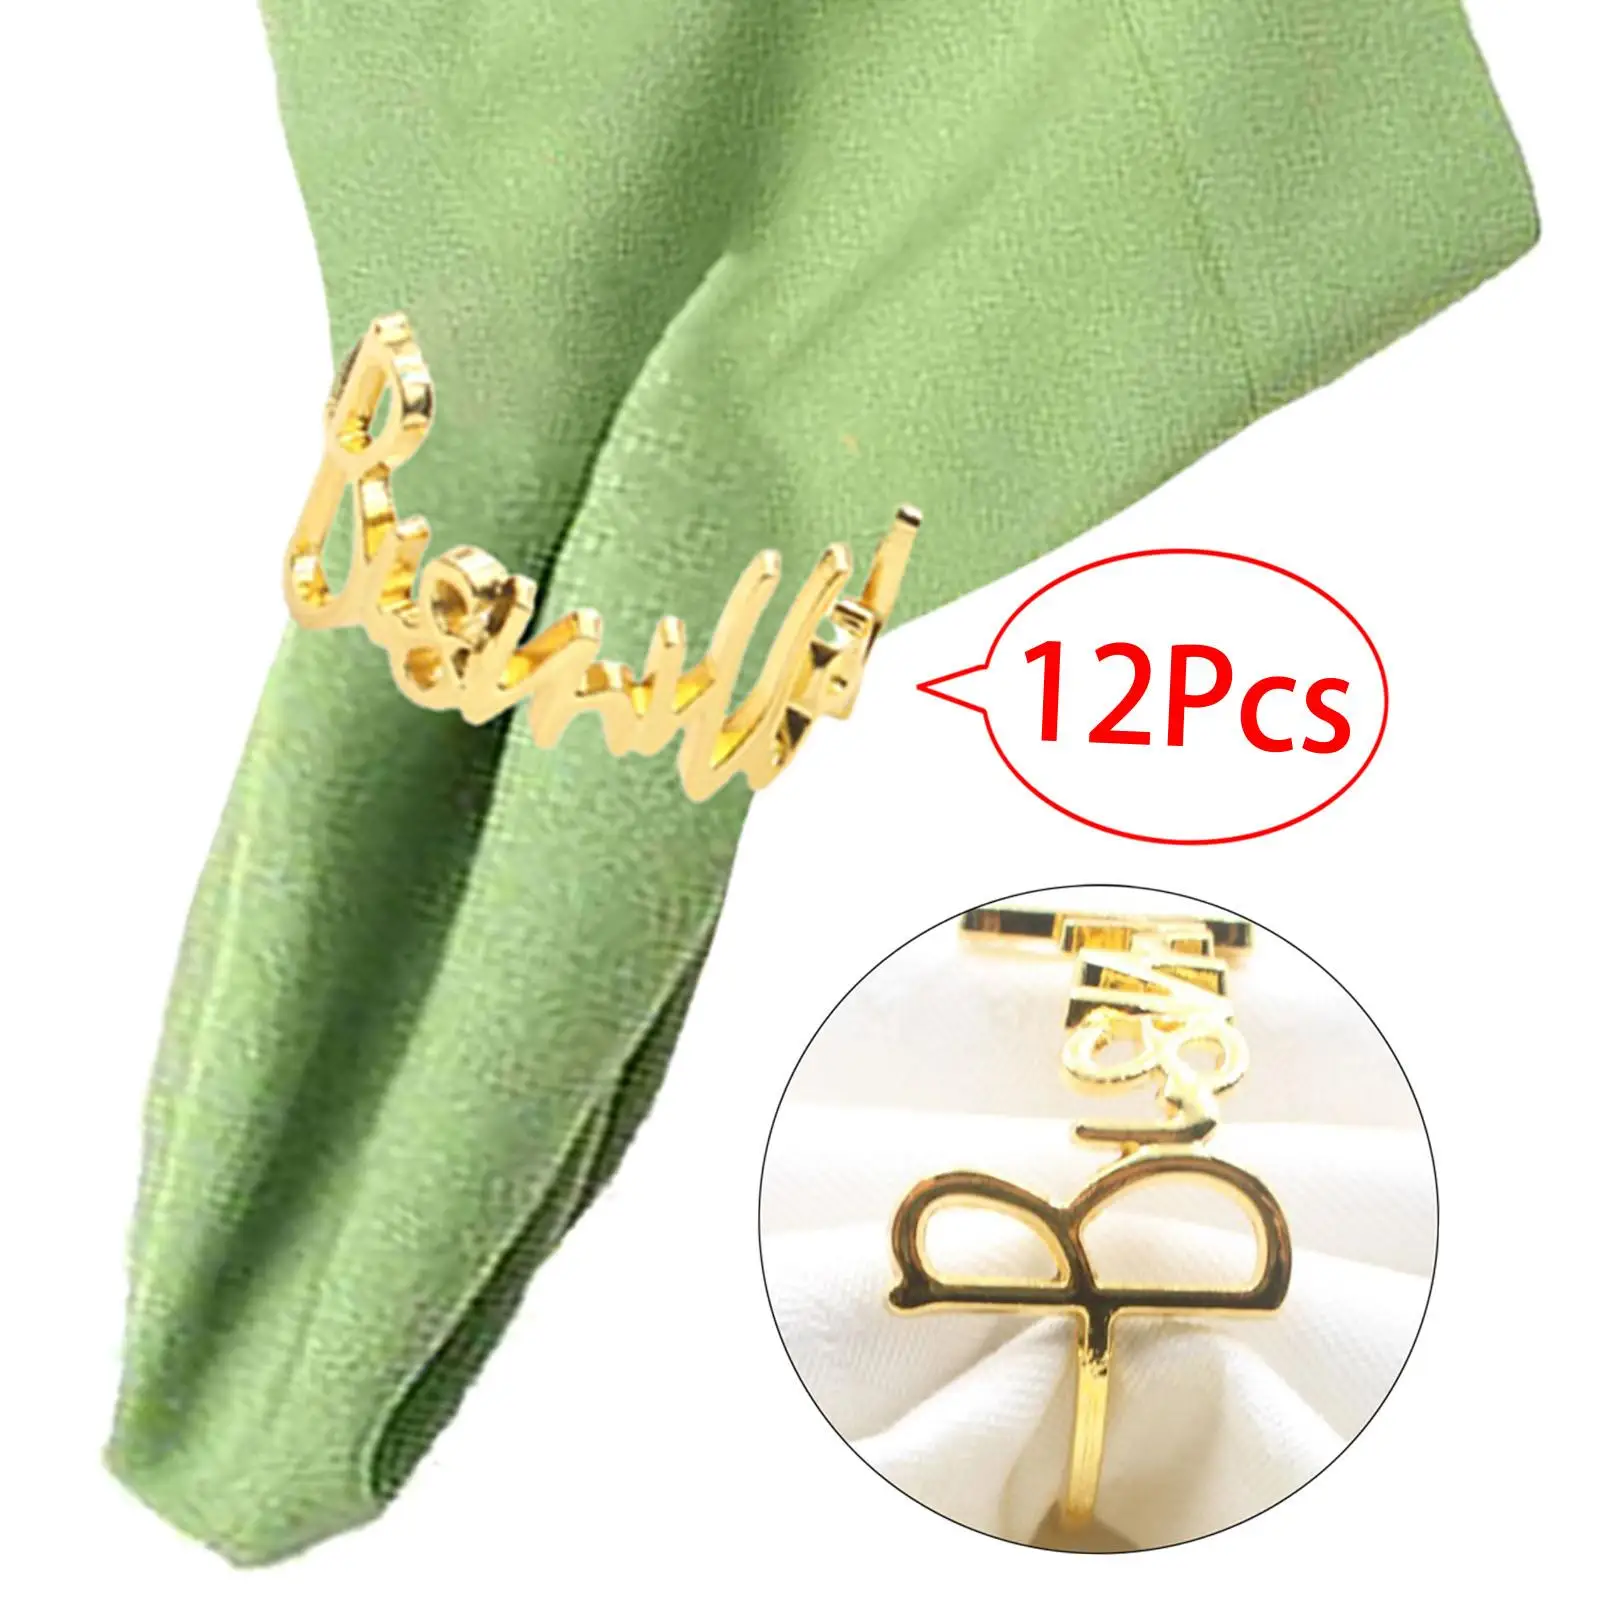 Napkin Rings Crafts Adornment Decoration Simple Napkin Rings Holder for Family Gathering Receptions Weddings Holidays Kitchen